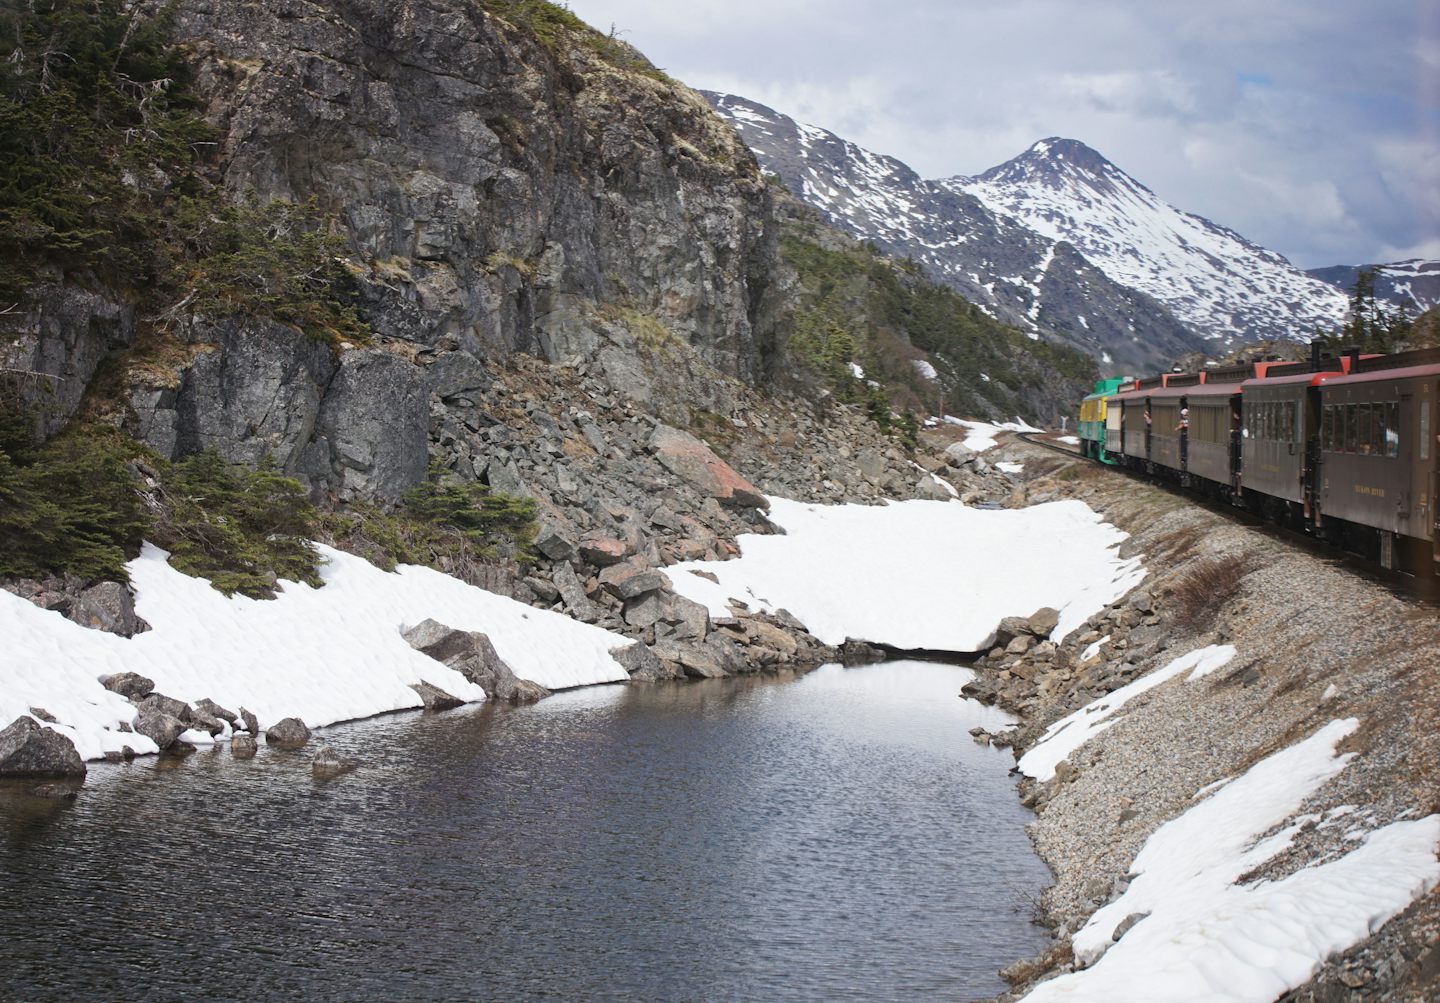 A view of the front of our train and beautiful landscape during our White Pass Summit excursion in Skagway.